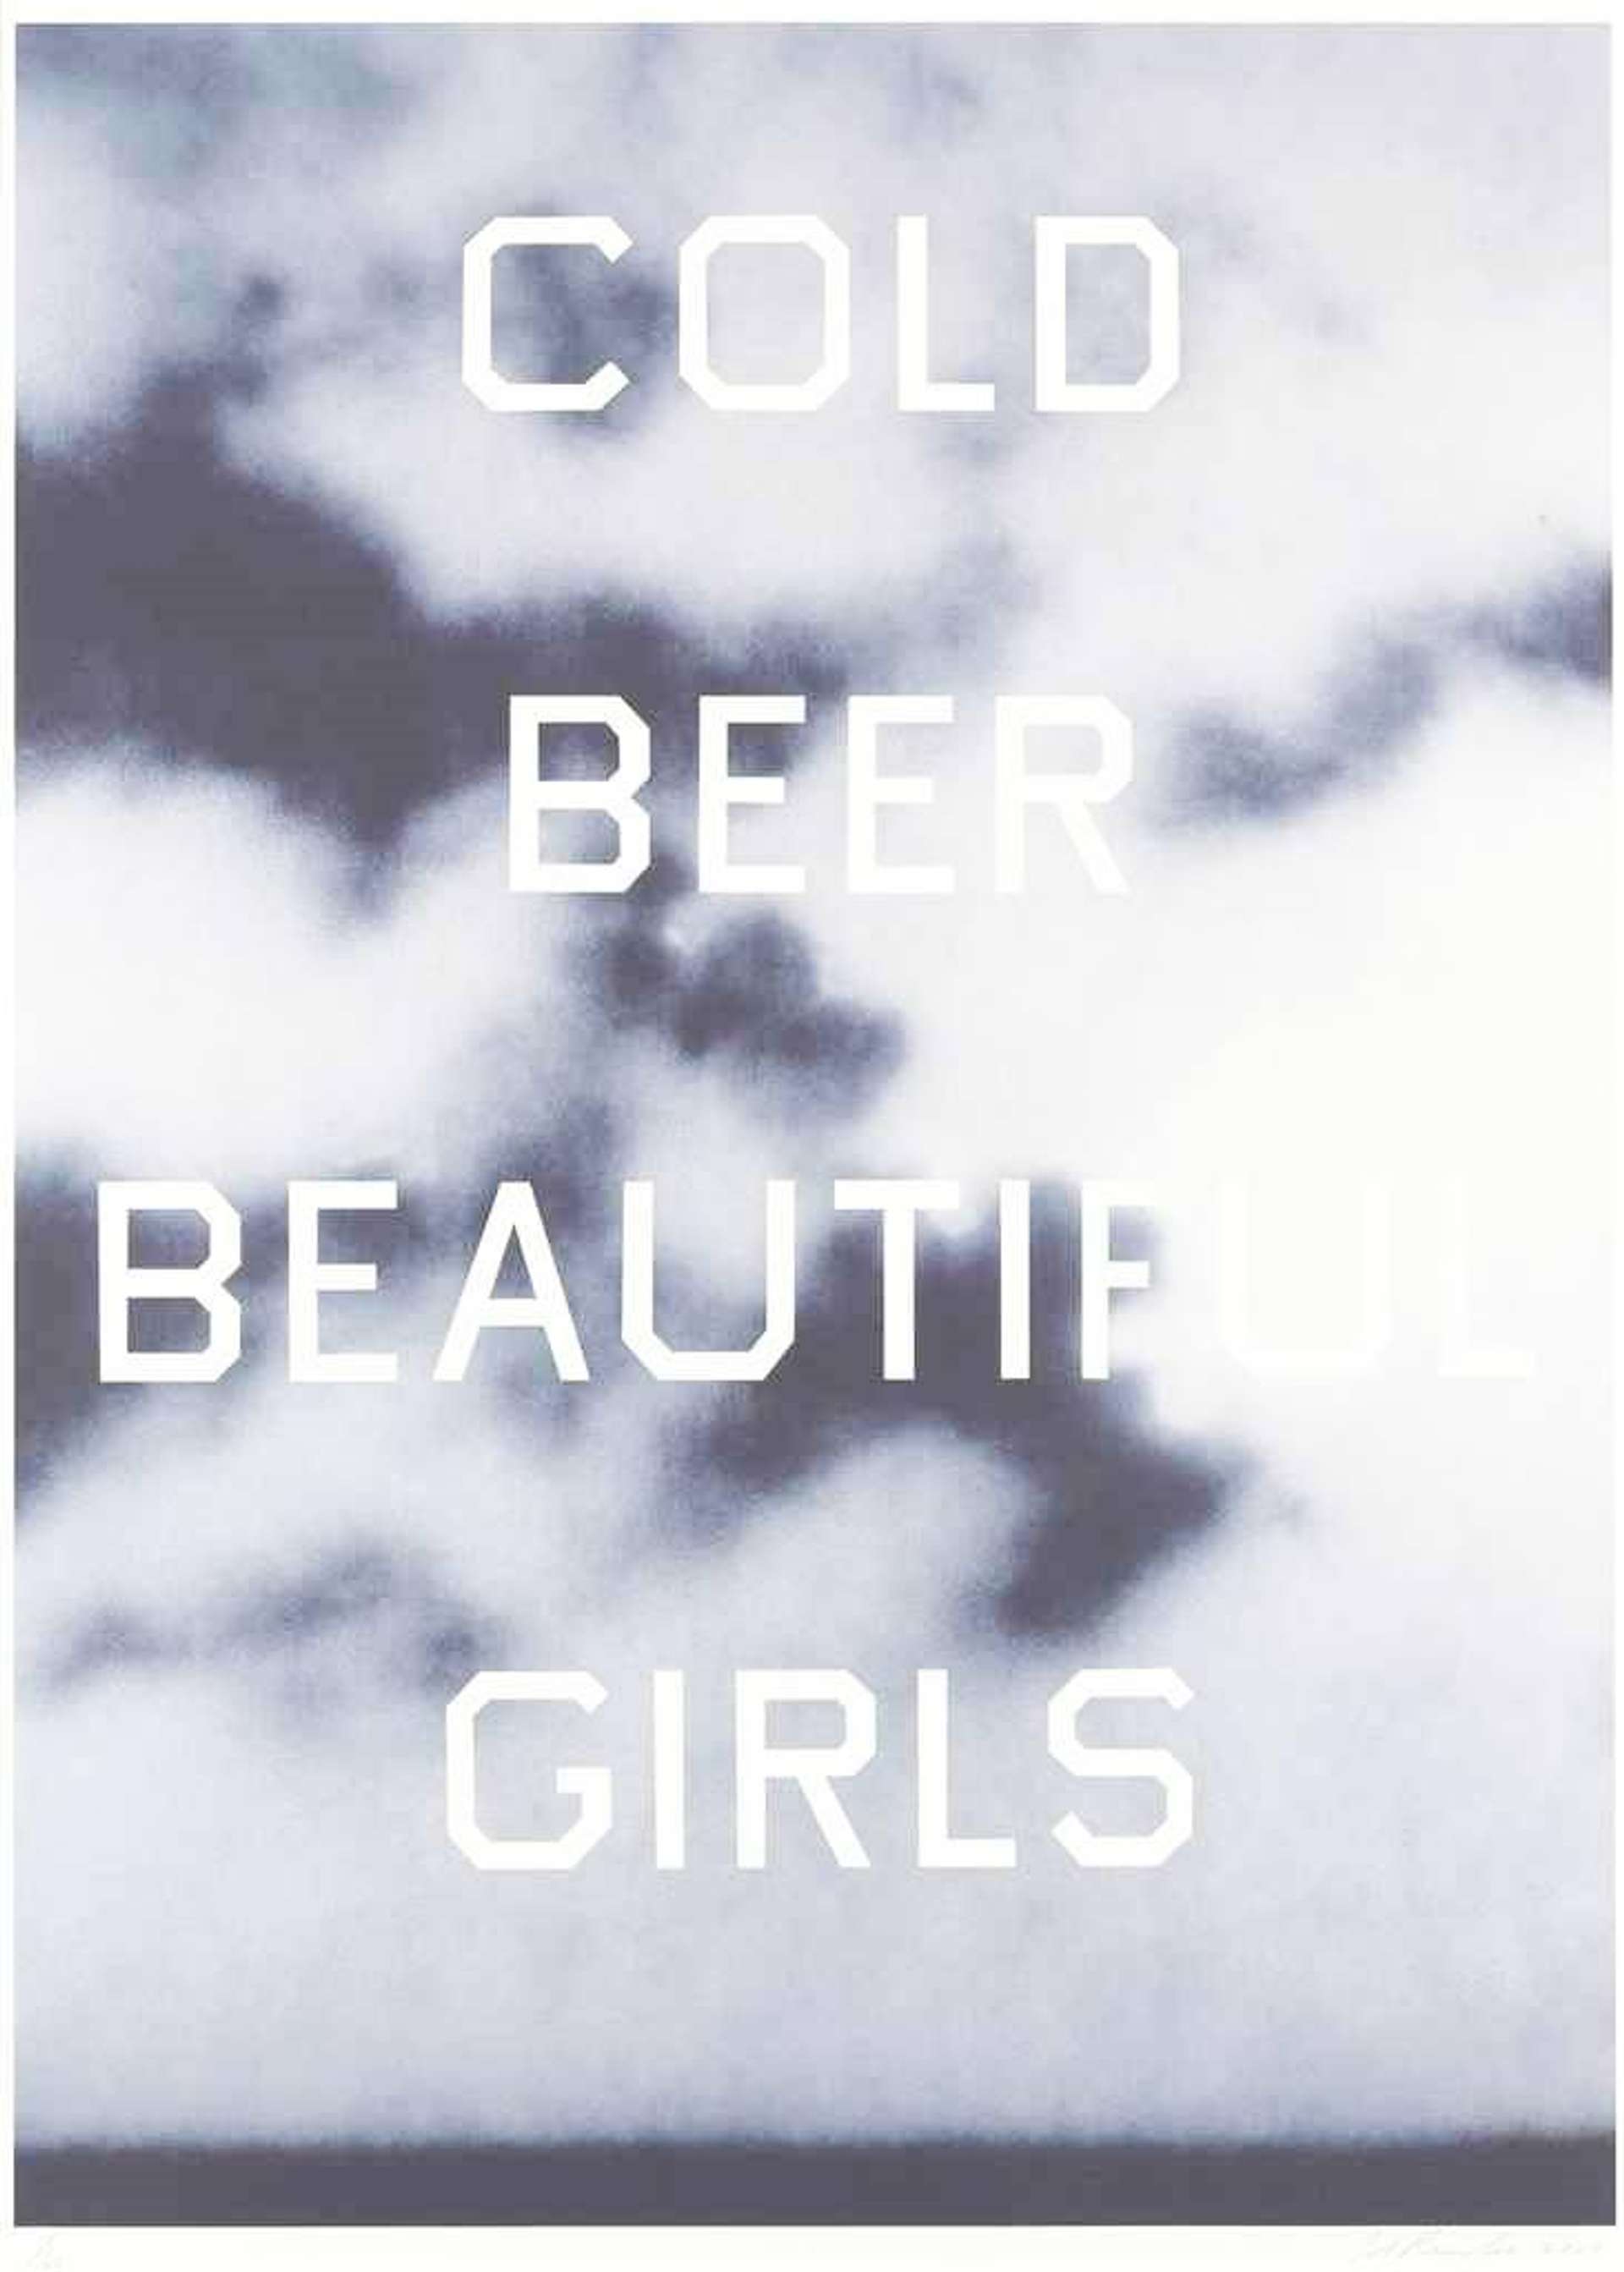 Lithograph by Ed Ruscha, depicting the words 'COLD BEER BEAUTIFUL GIRLS' in centred, capitalised white lettering. The text is set against a backdrop of white clouds against a dark blue sky.